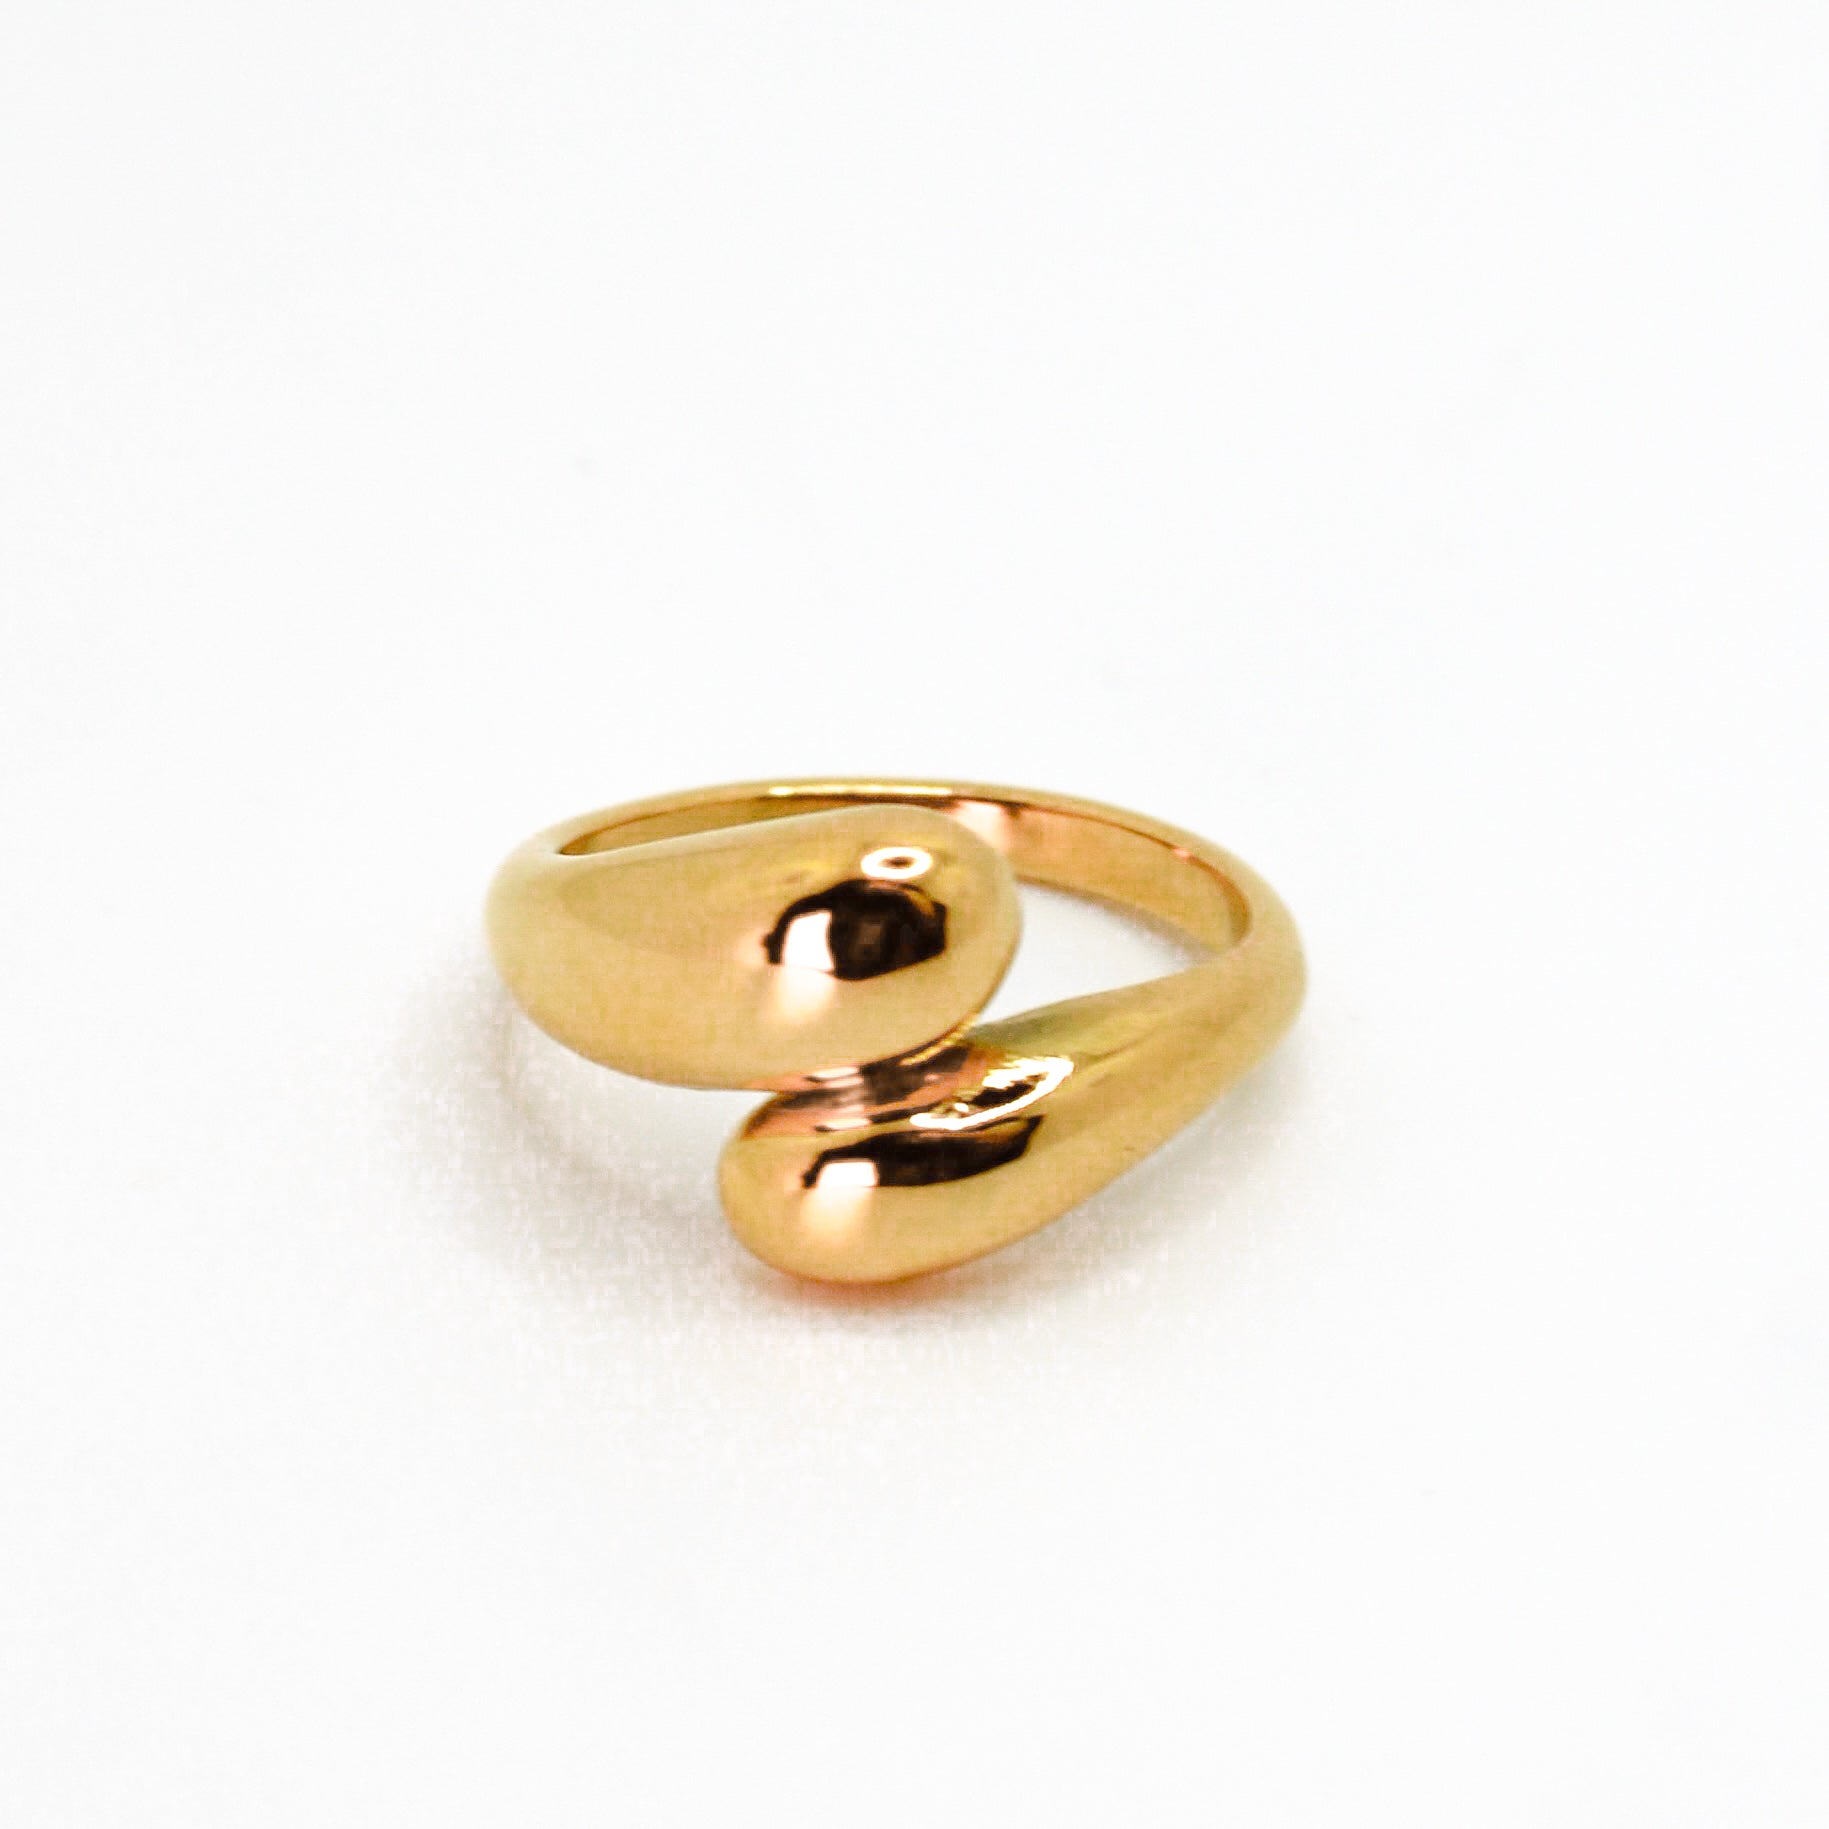 Statement Ring - For the Girls Jewelry